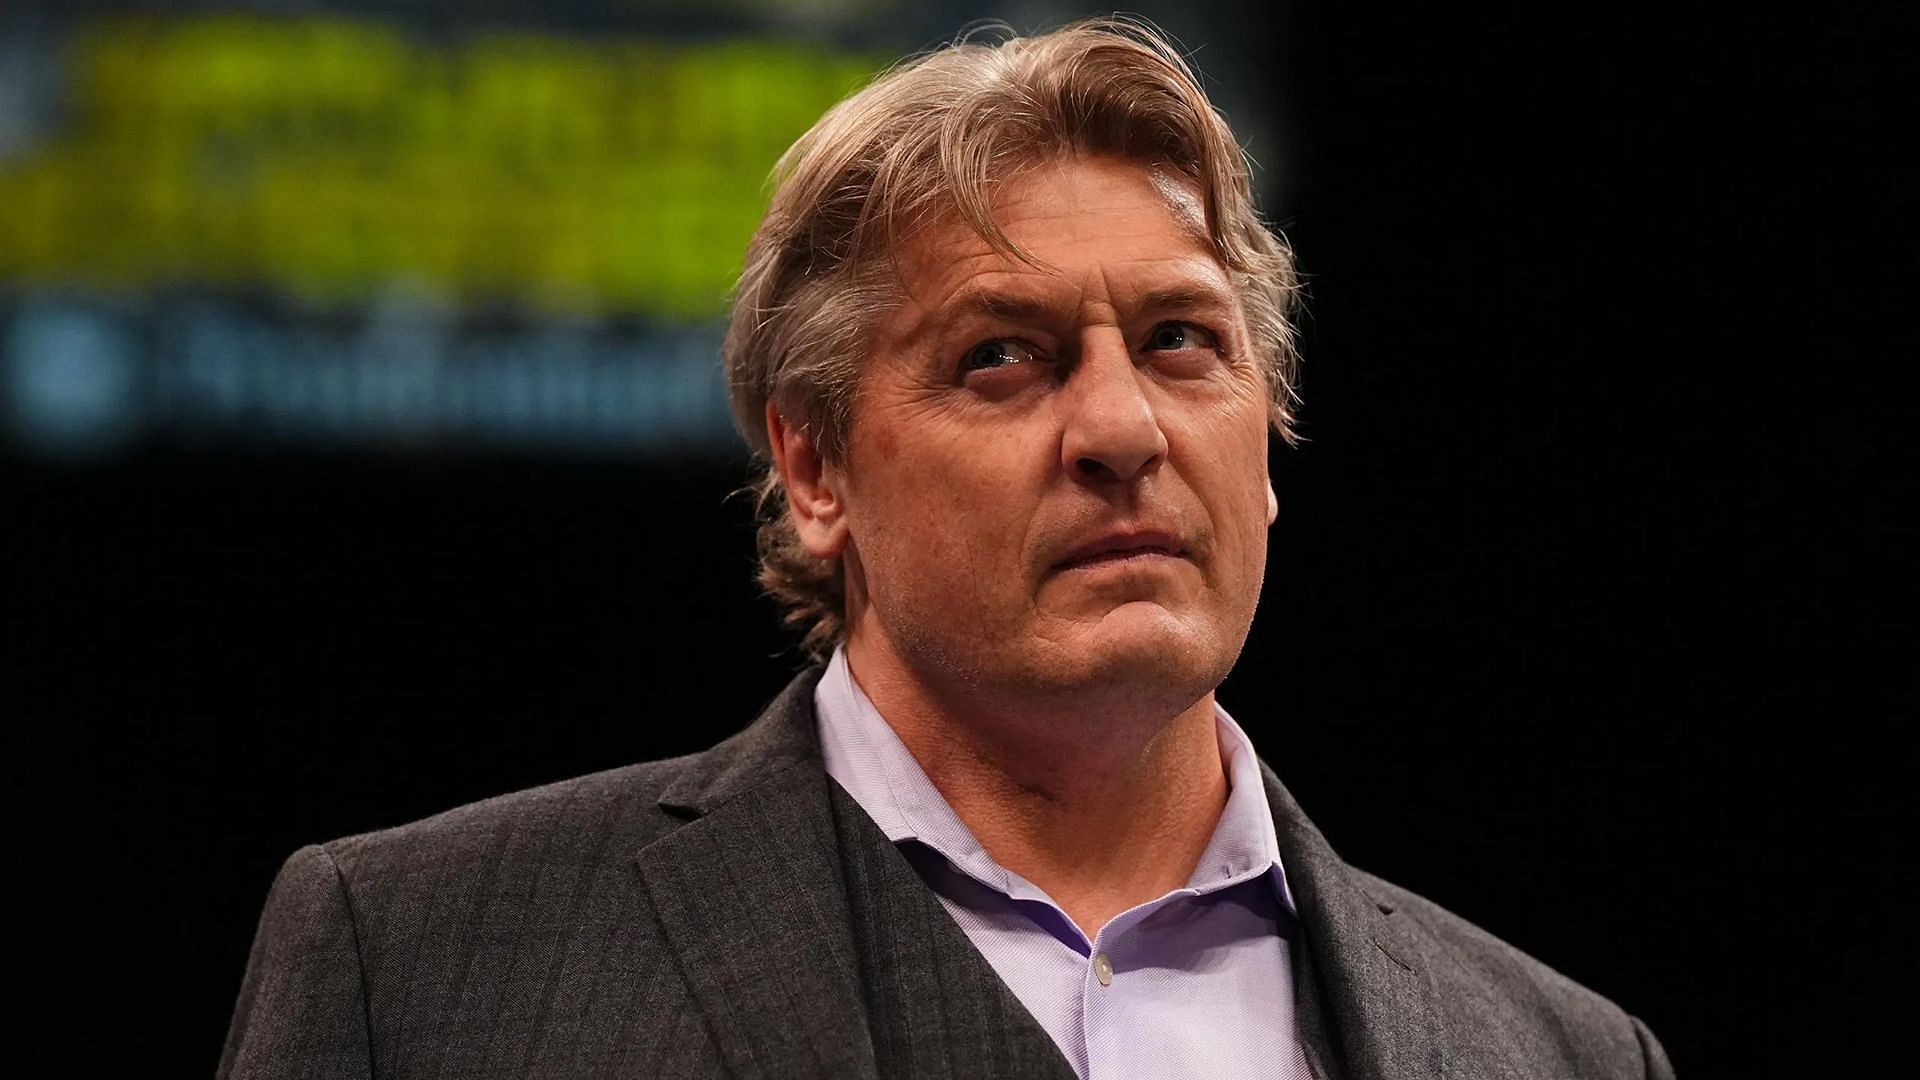 William Regal stands in the ring on AEW Dynamite